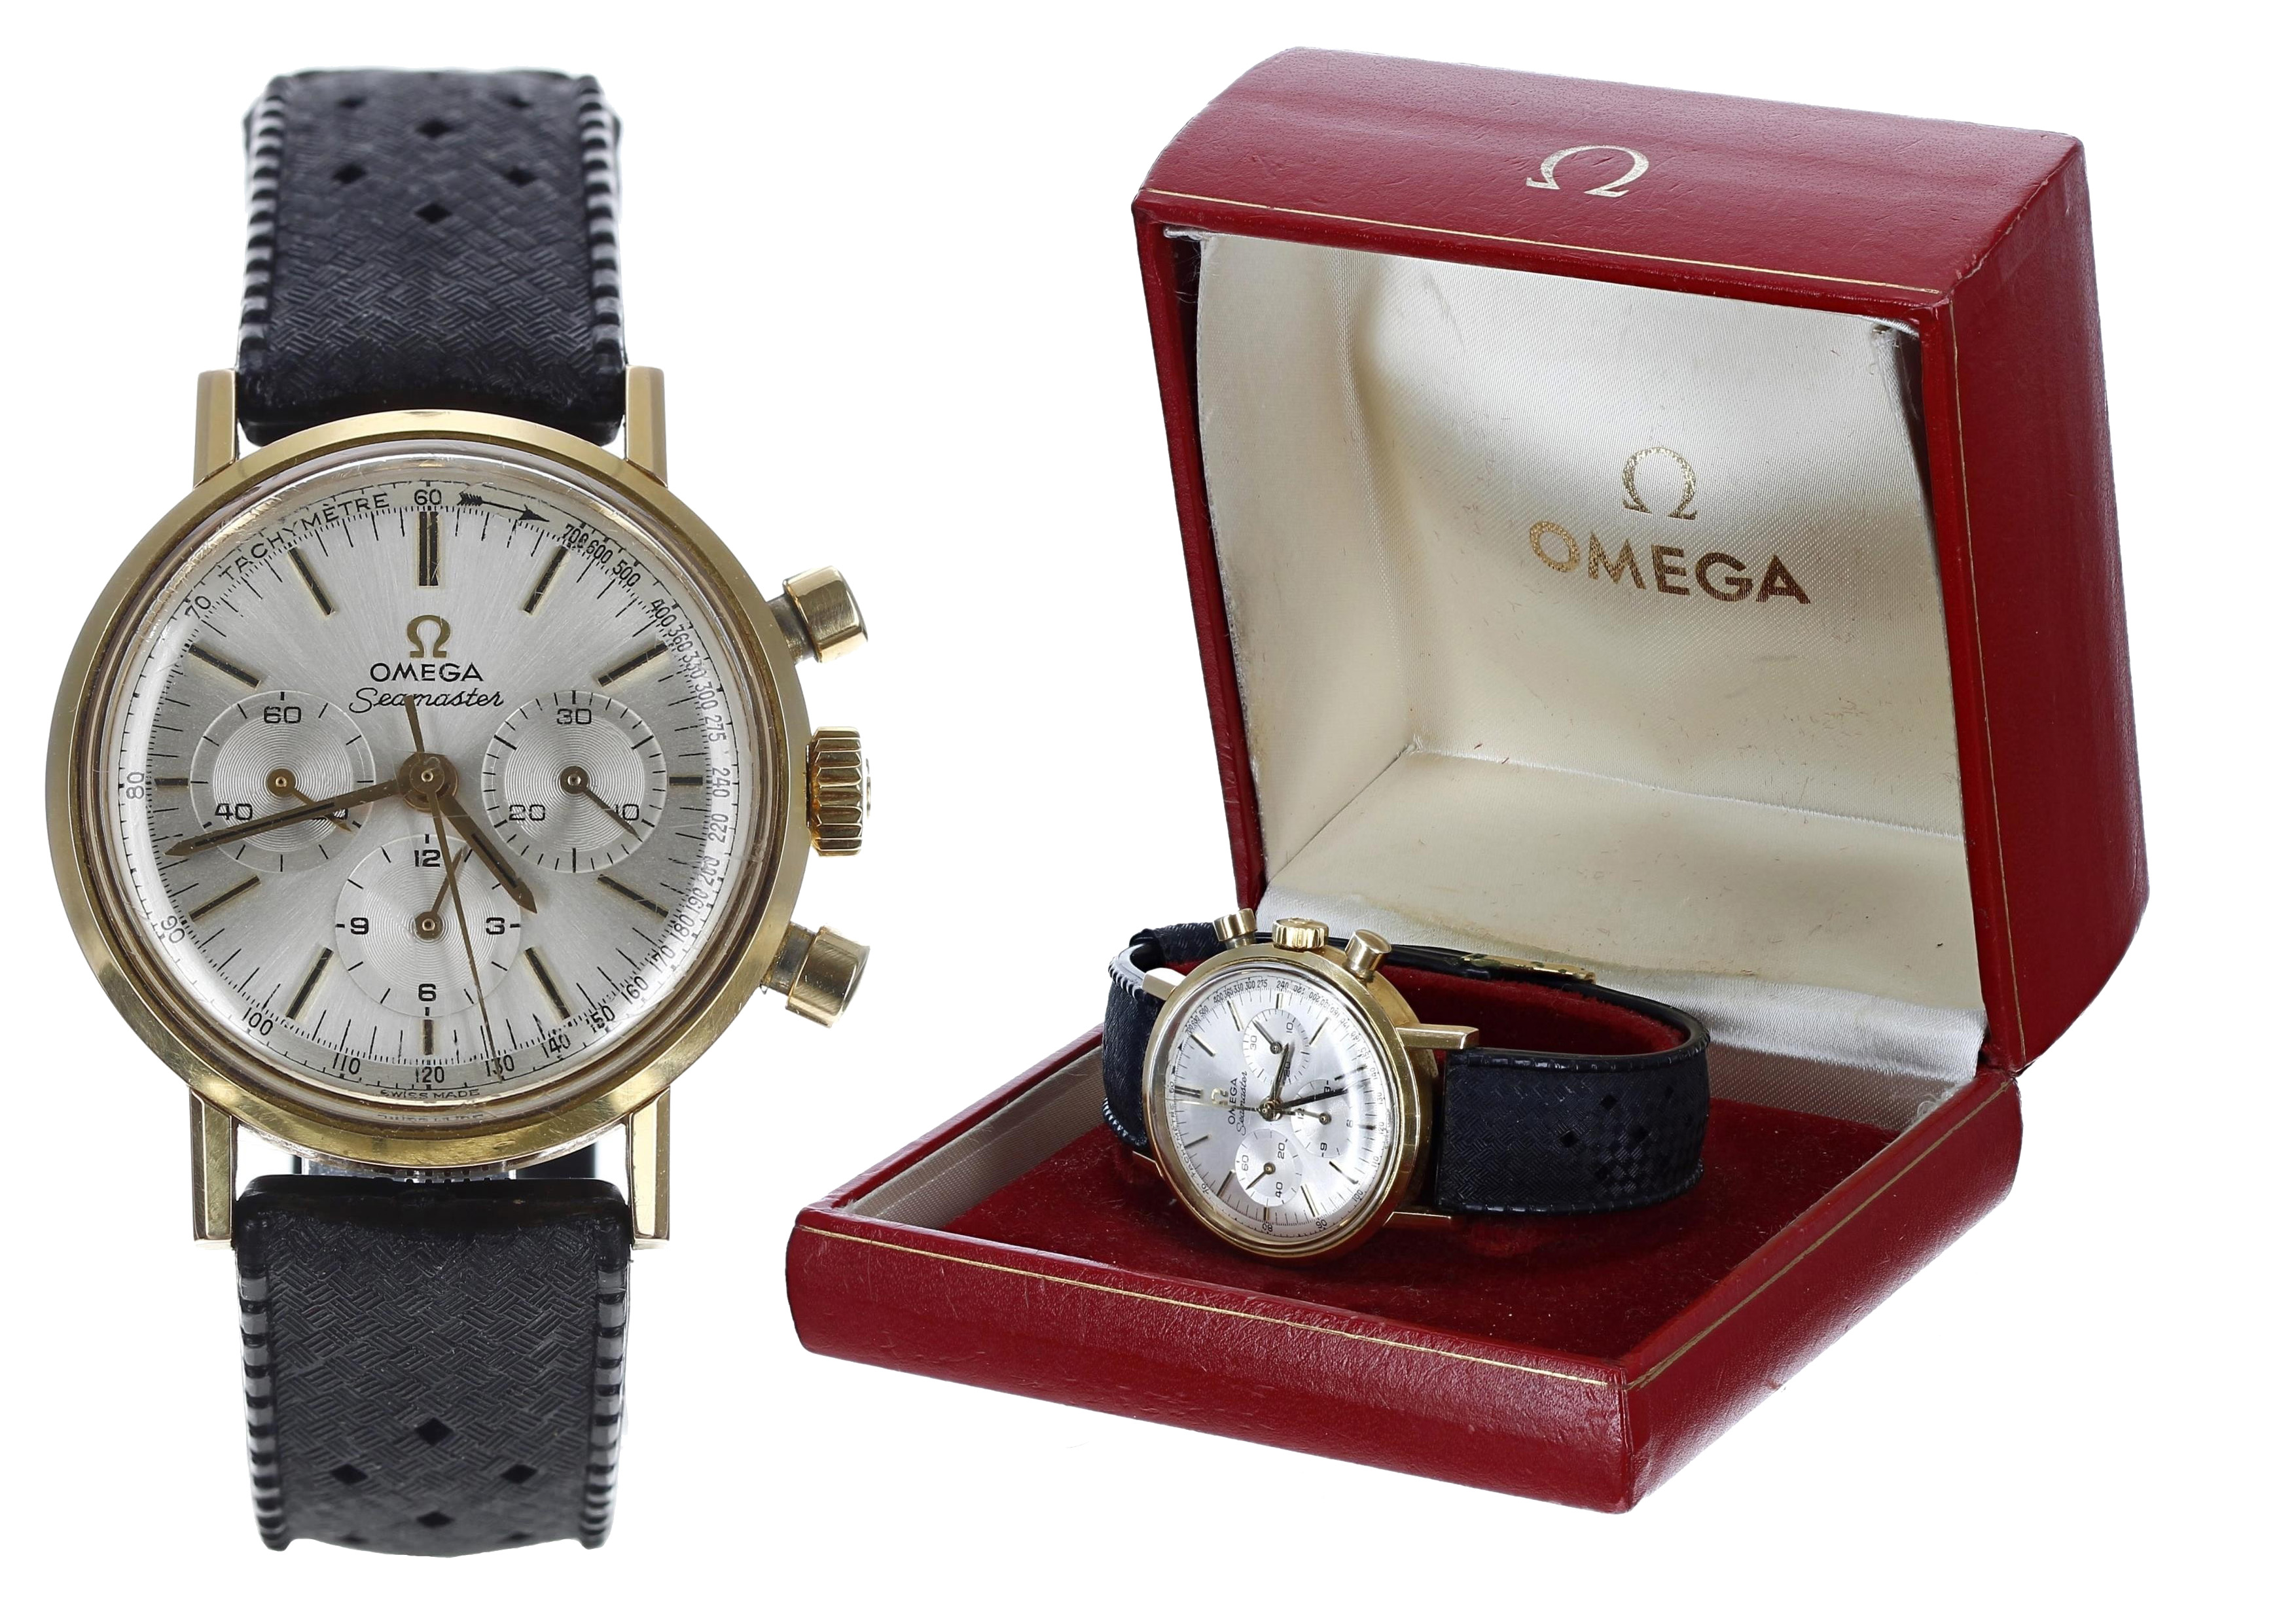 Omega Seamaster Chronograph gold plated and stainless steel gentleman's wristwatch, reference no.